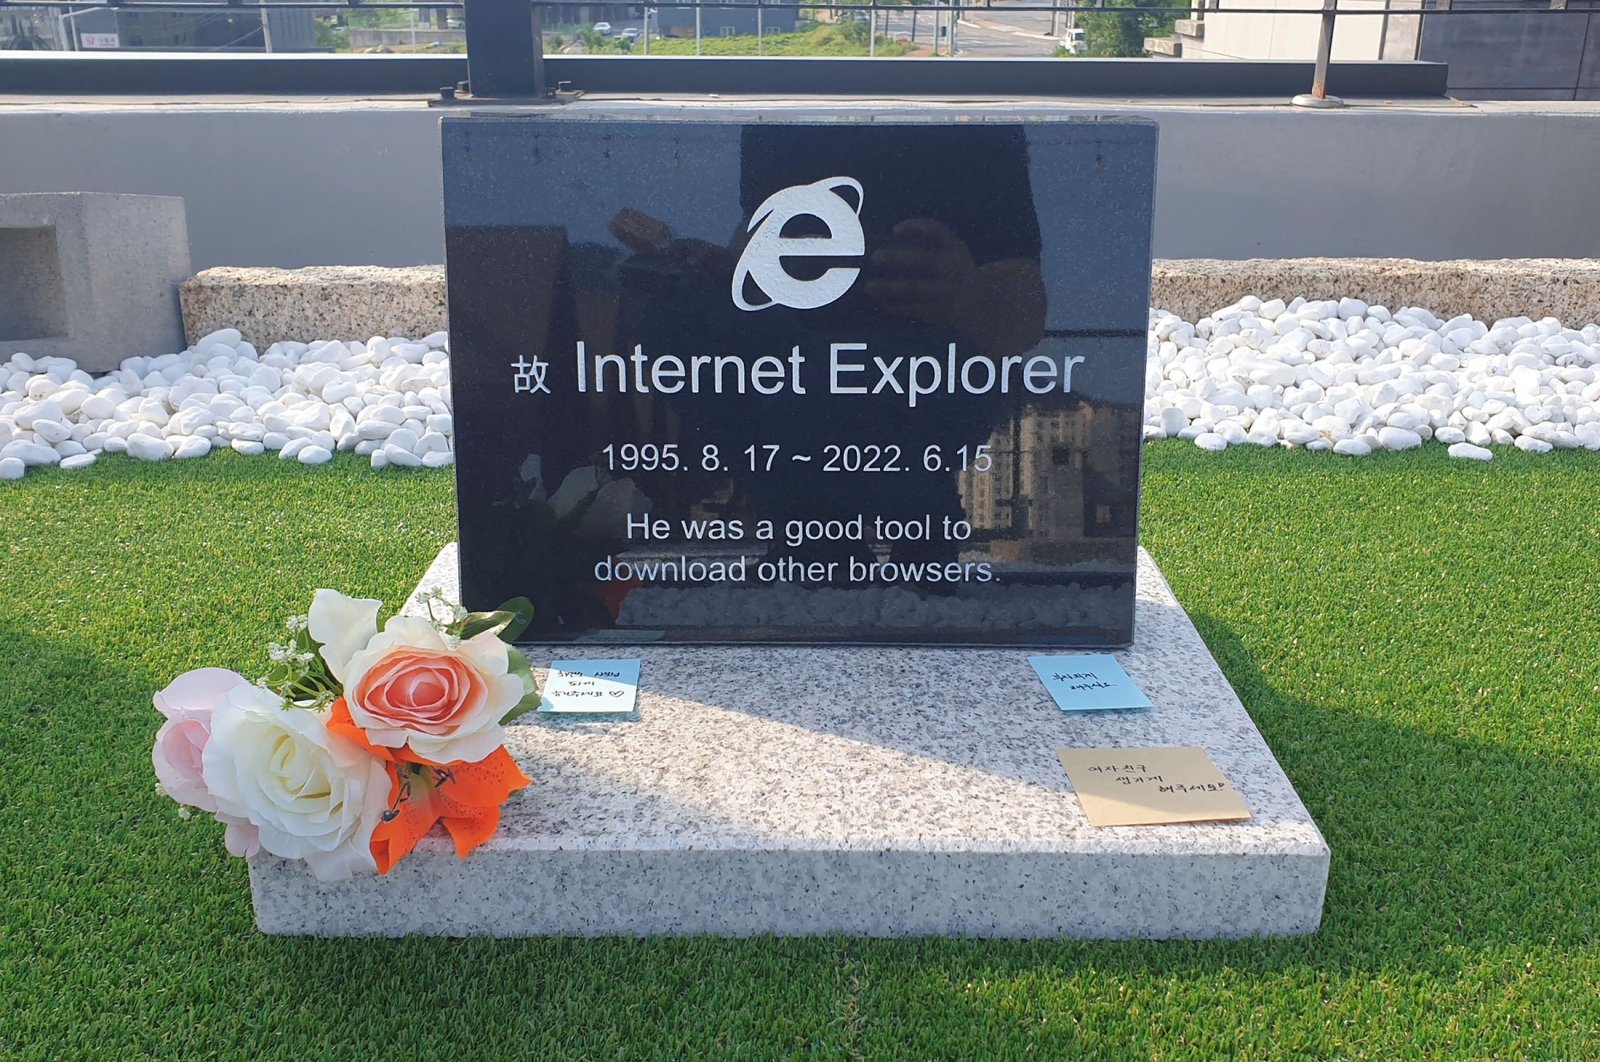 Tombstone of Internet Explorer browser, set up by South Korean software engineer Jung Ki-young, at a rooftop of a cafe in Gyeongju, South Korea, June 17, 2022. (Jung Ki-Young via Reuters)